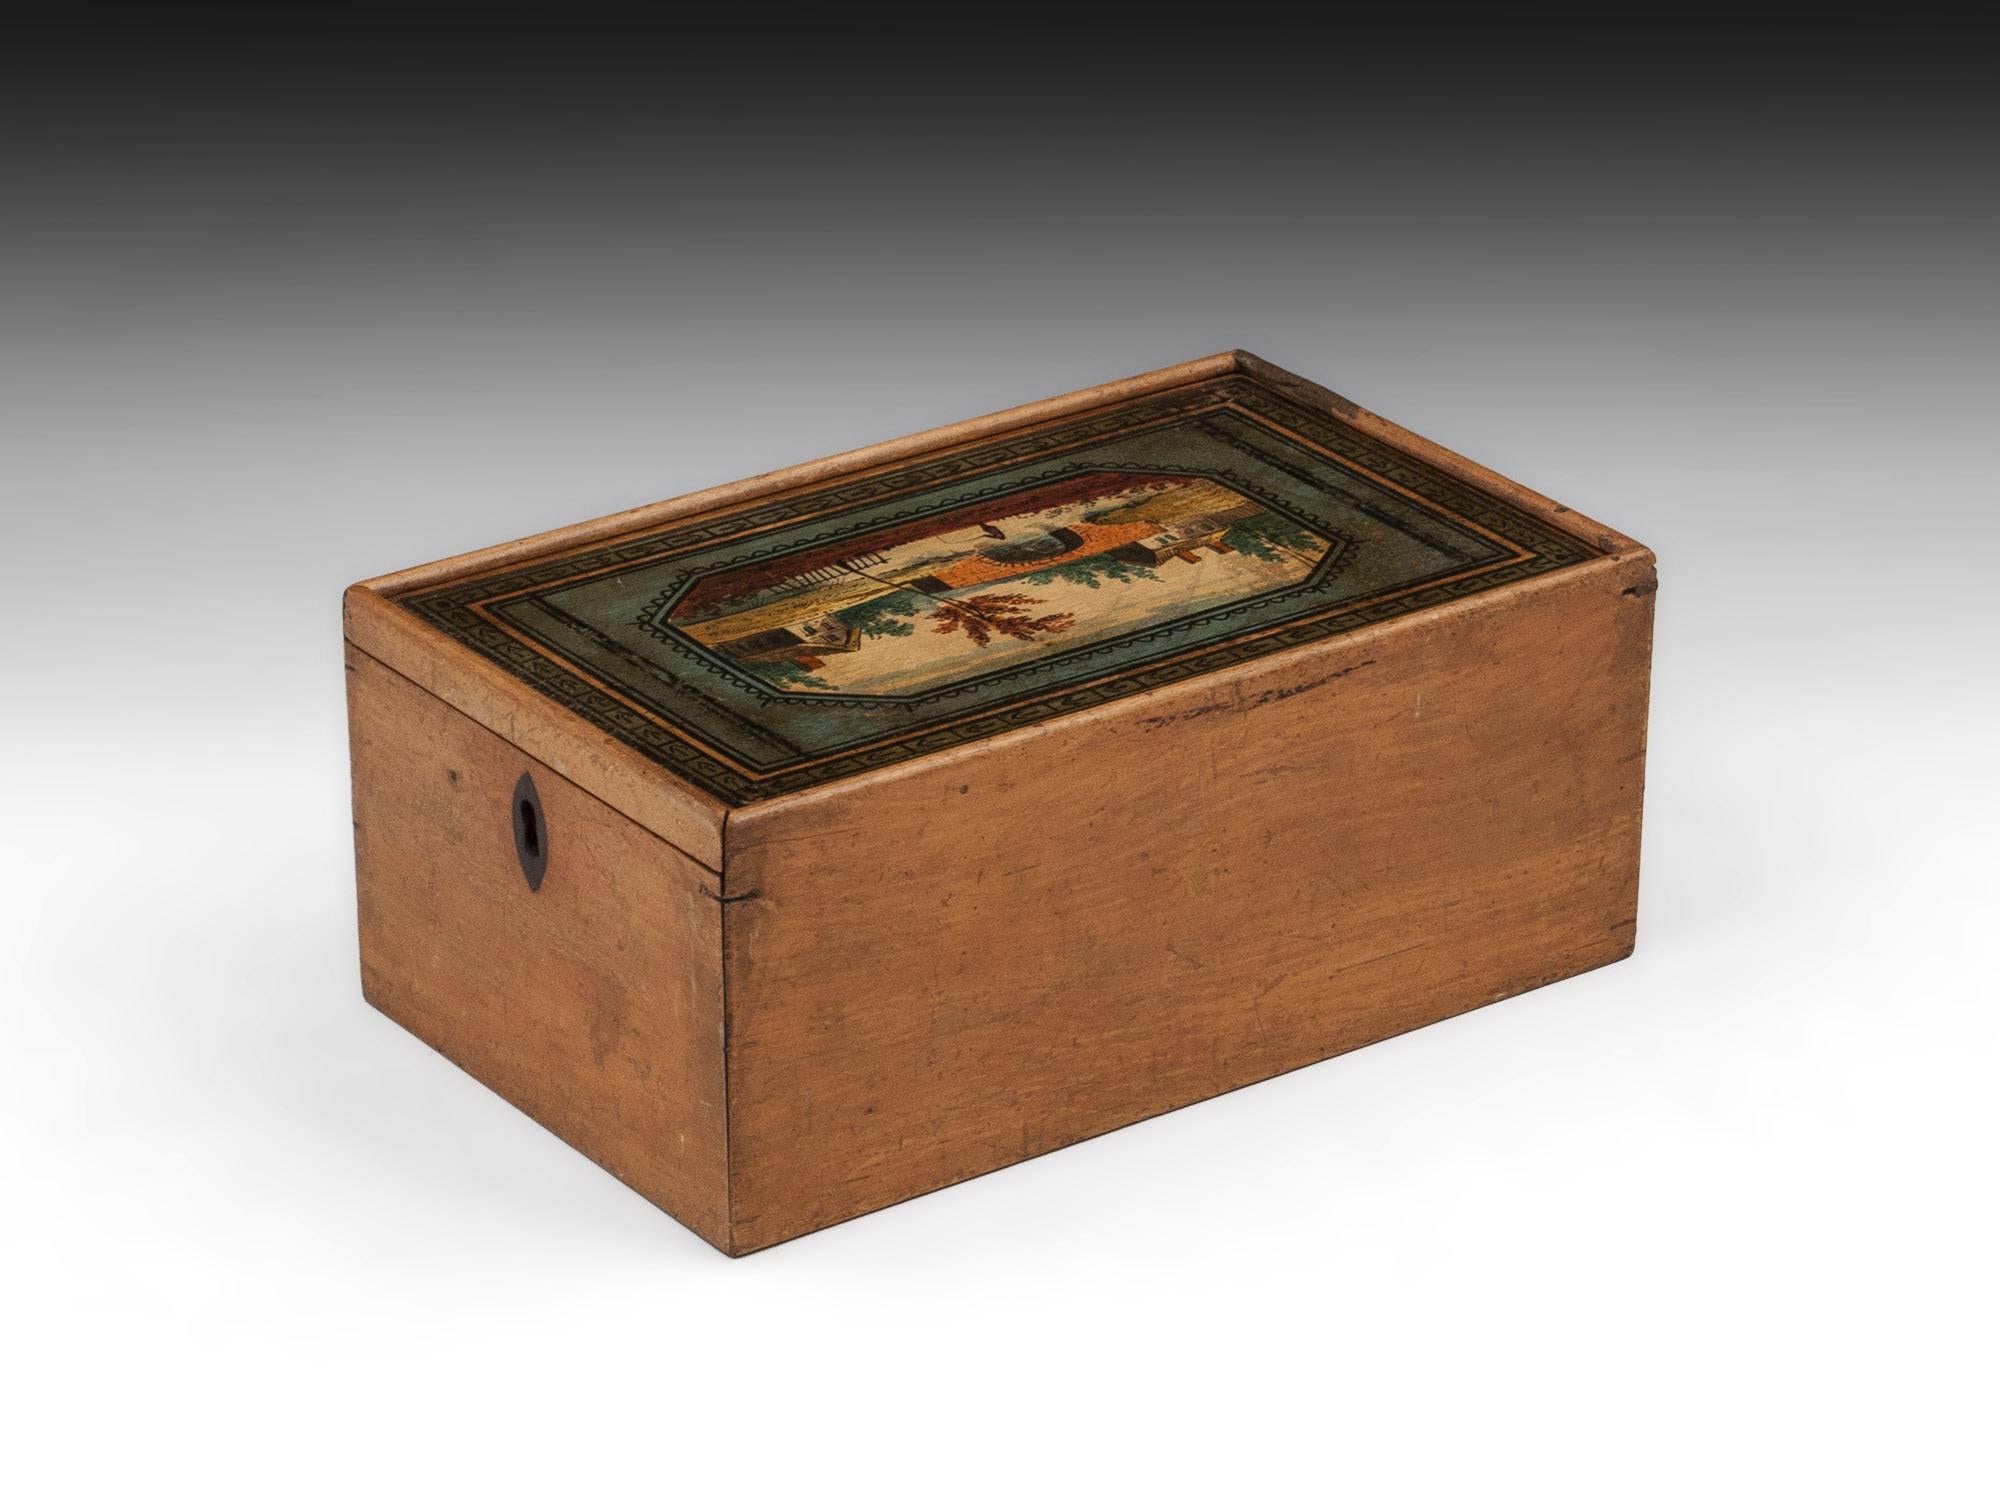 Antique Folk Art Tunbridge Ware Painted Sewing Box, 19th Century In Good Condition For Sale In Northampton, United Kingdom